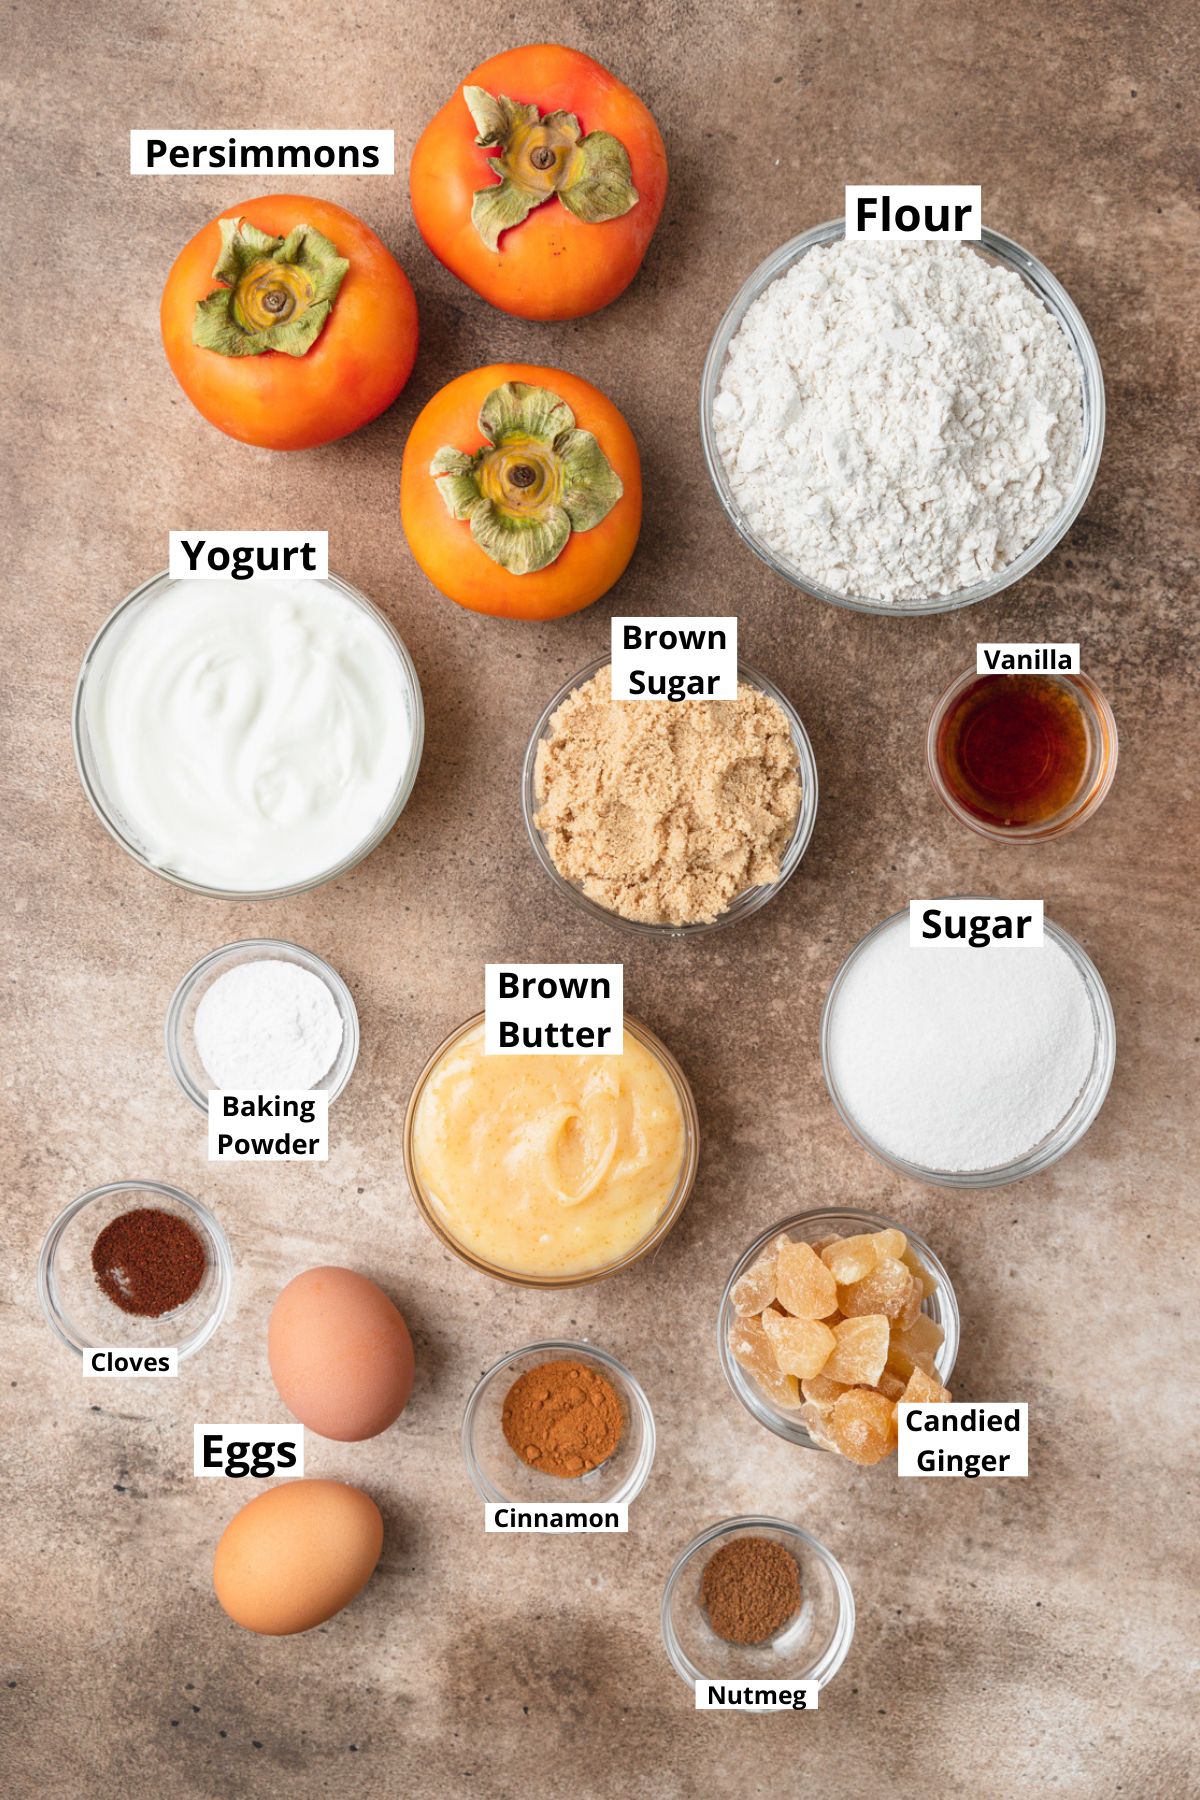 labeled ingredients for persimmon loaf cake.